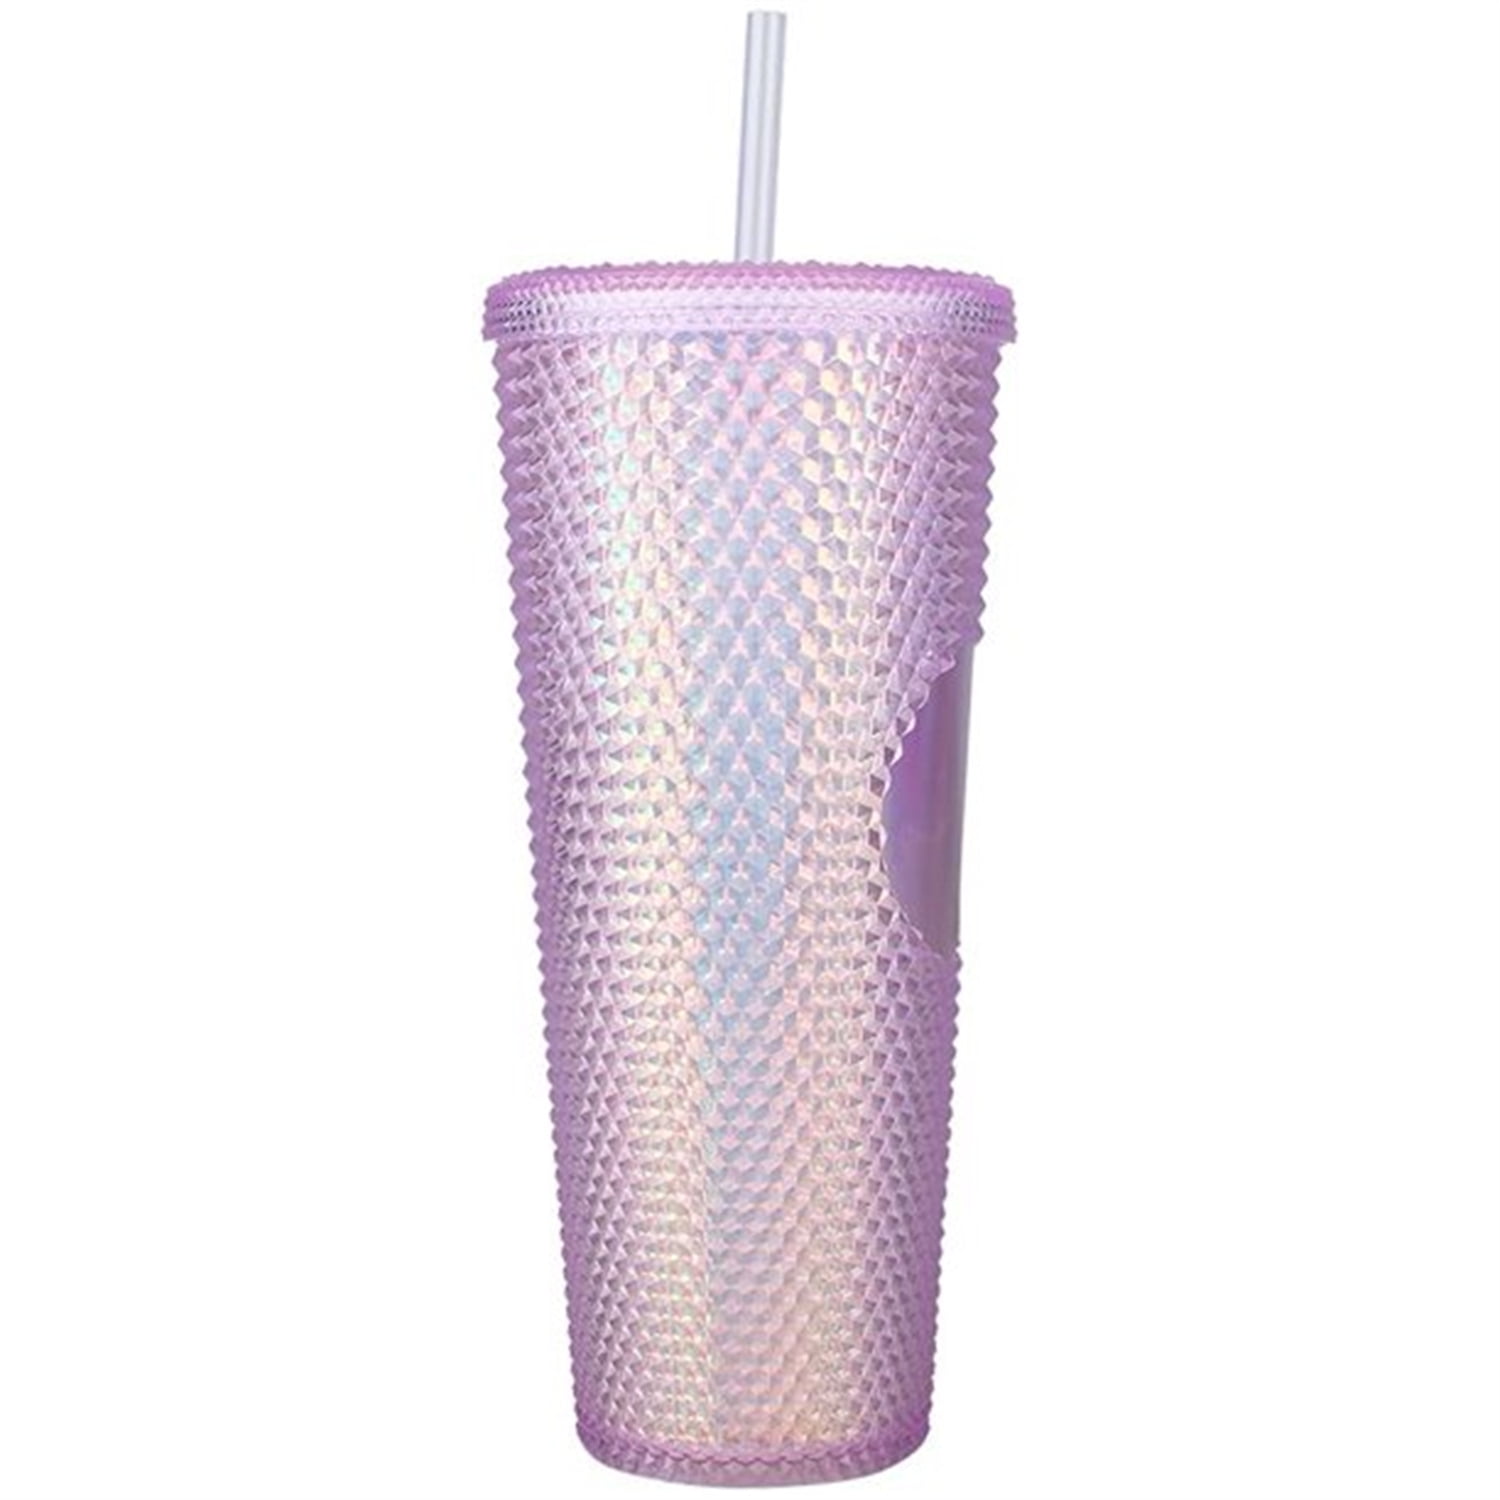 Matte Studded Cups, GIXUSIL 24 OZ Matte Studded Large Tumbler with Lid sand  Straws,BPA FREE,Insulated Studded Double Wall Cups with Straw,Reusable DIY  Studded Plastic Tumbler,Birthday Gift (Pink) 